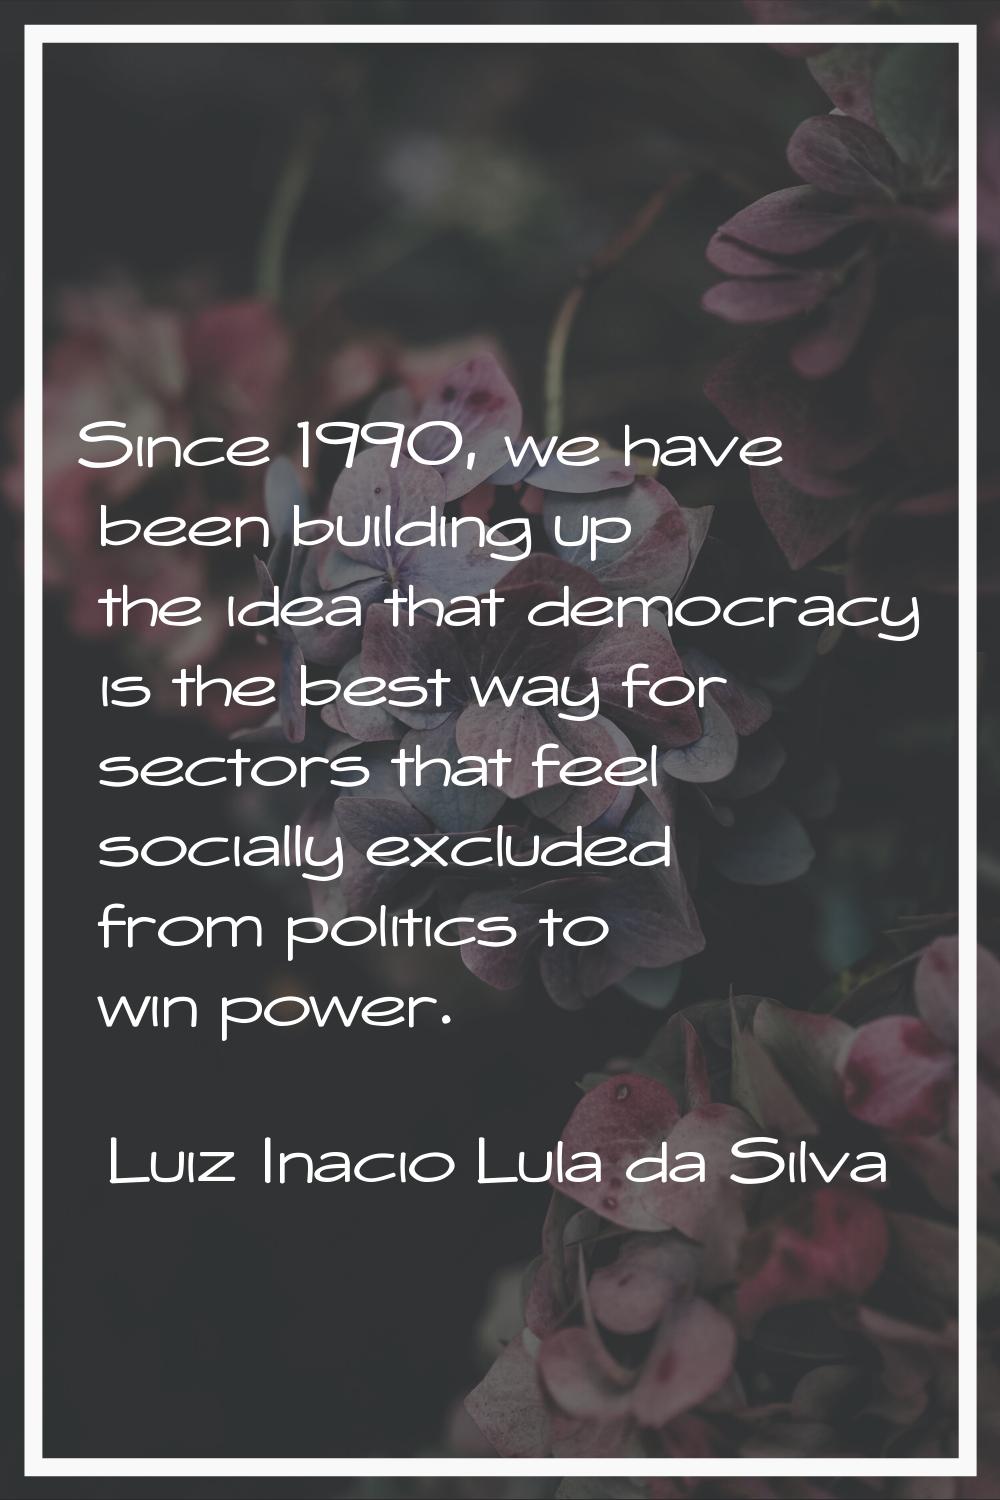 Since 1990, we have been building up the idea that democracy is the best way for sectors that feel 